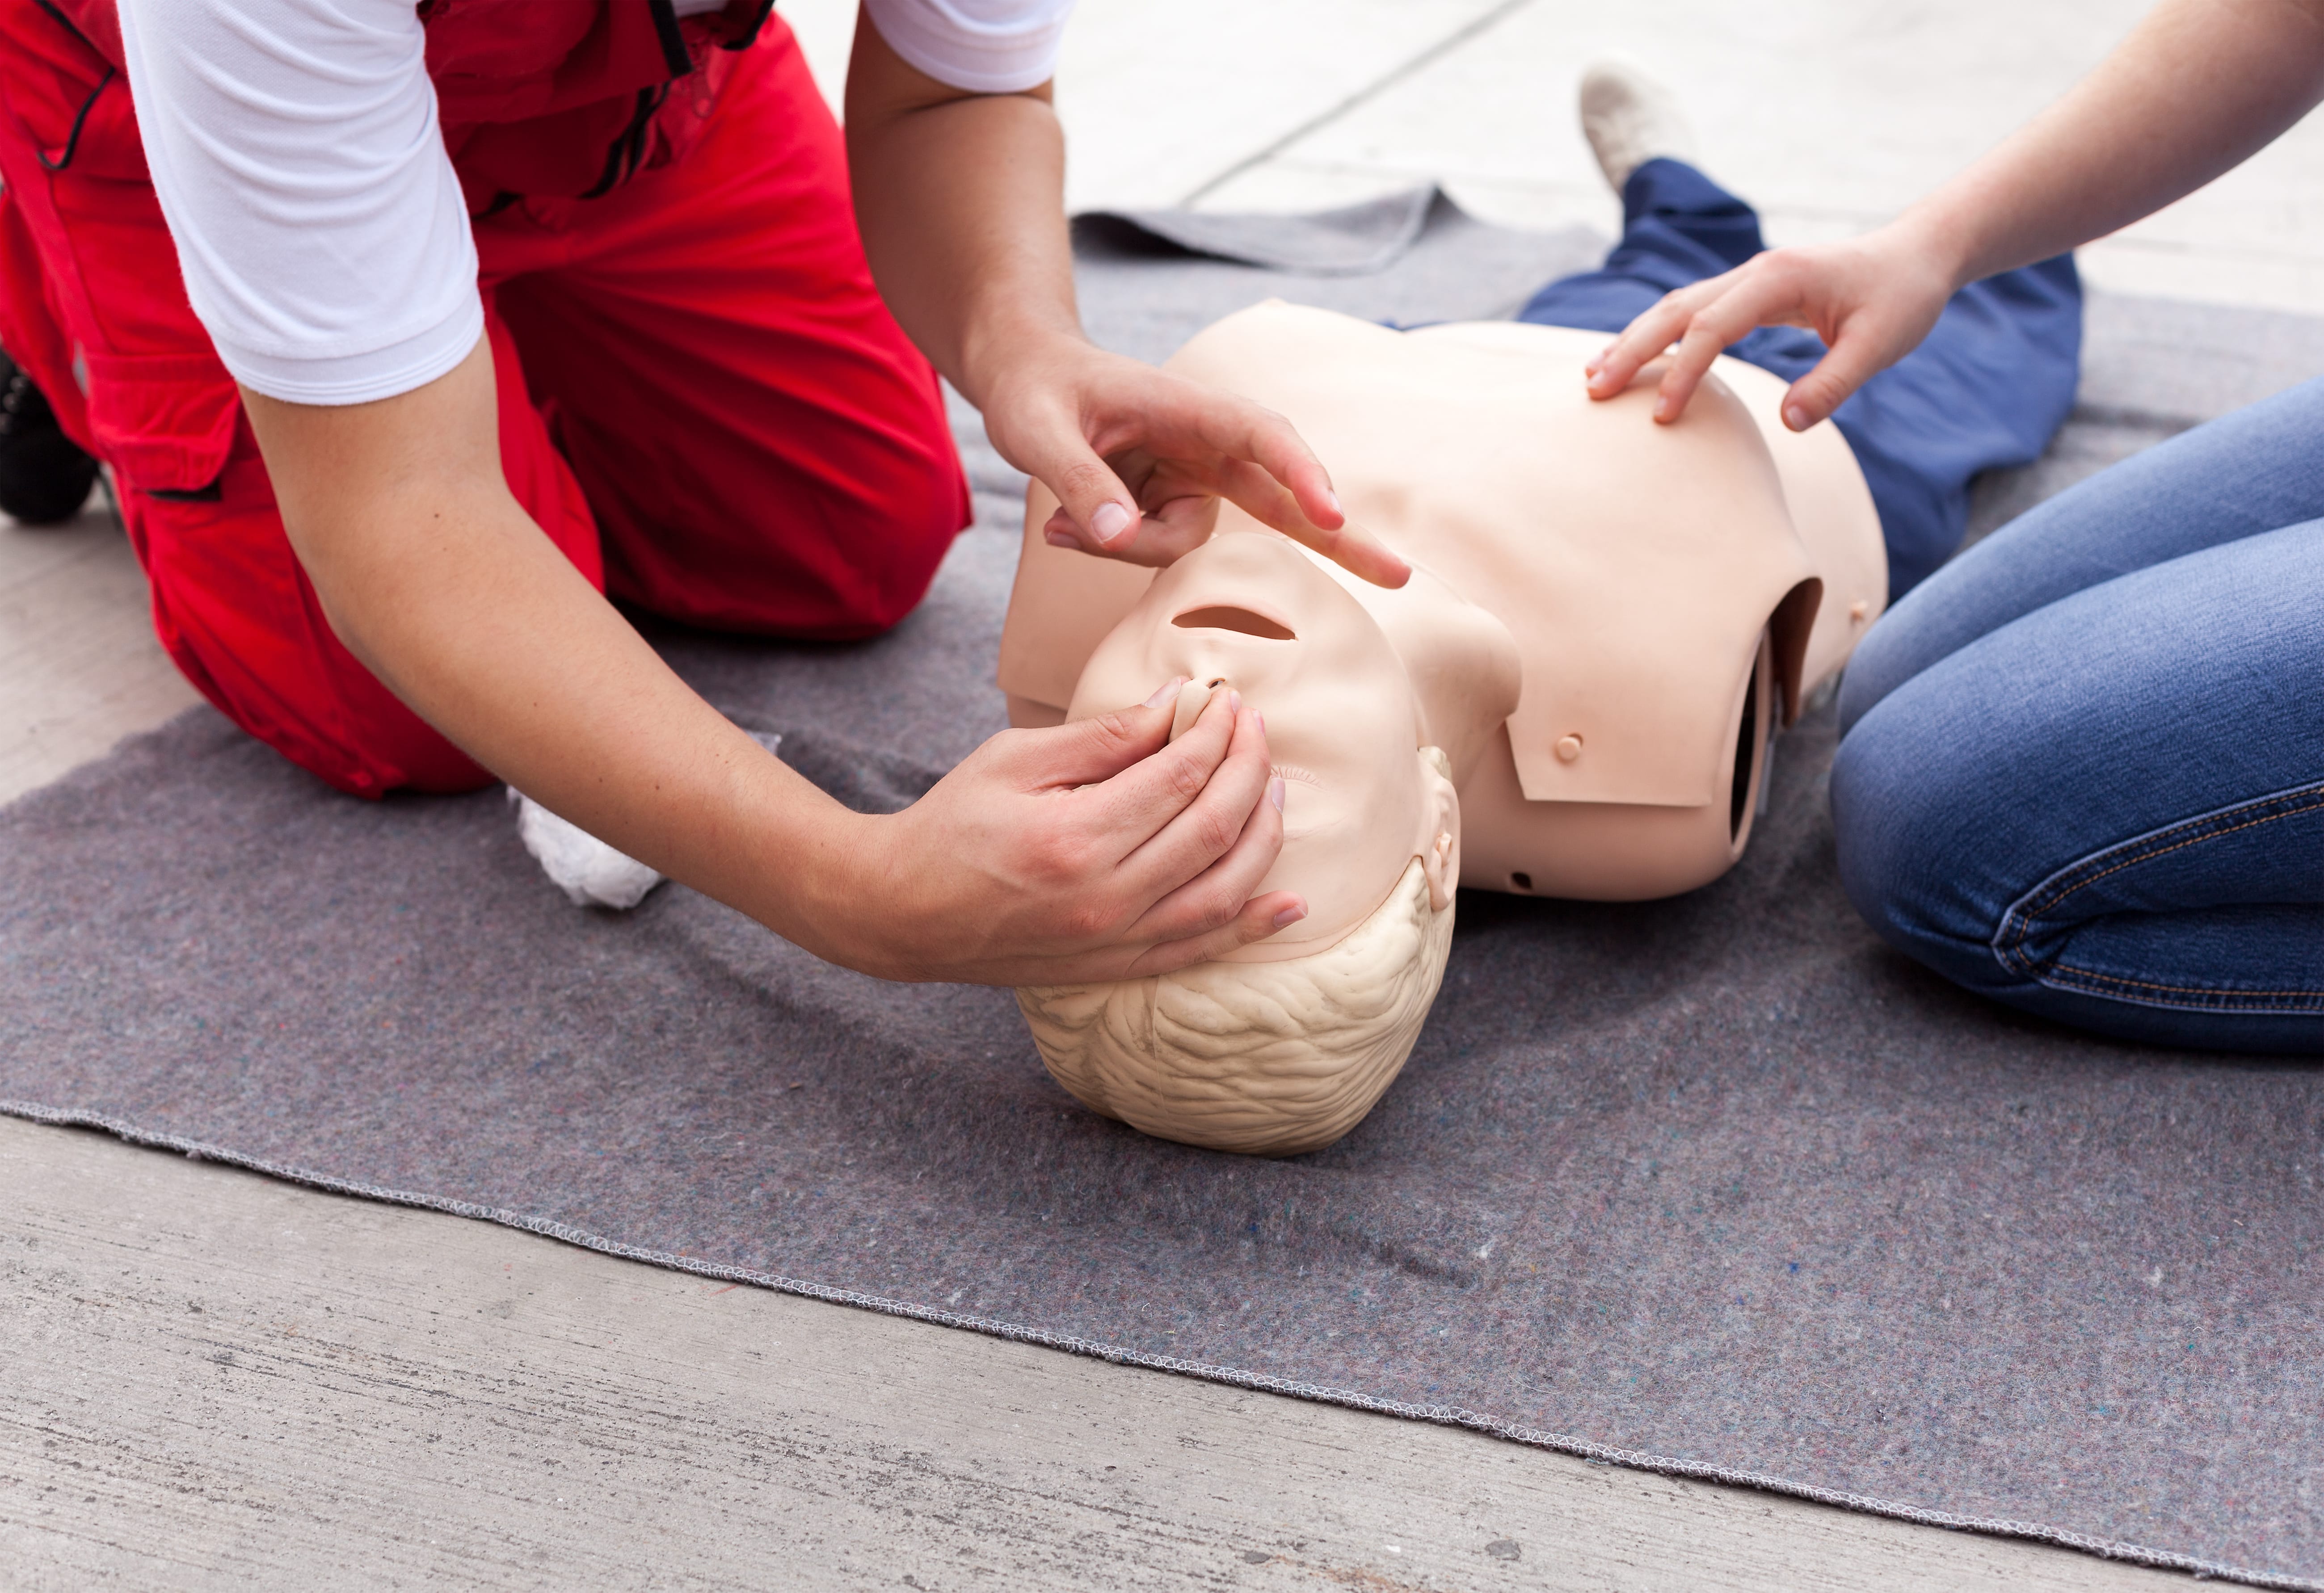 10 Benefits of First Aid Training in the Workplace